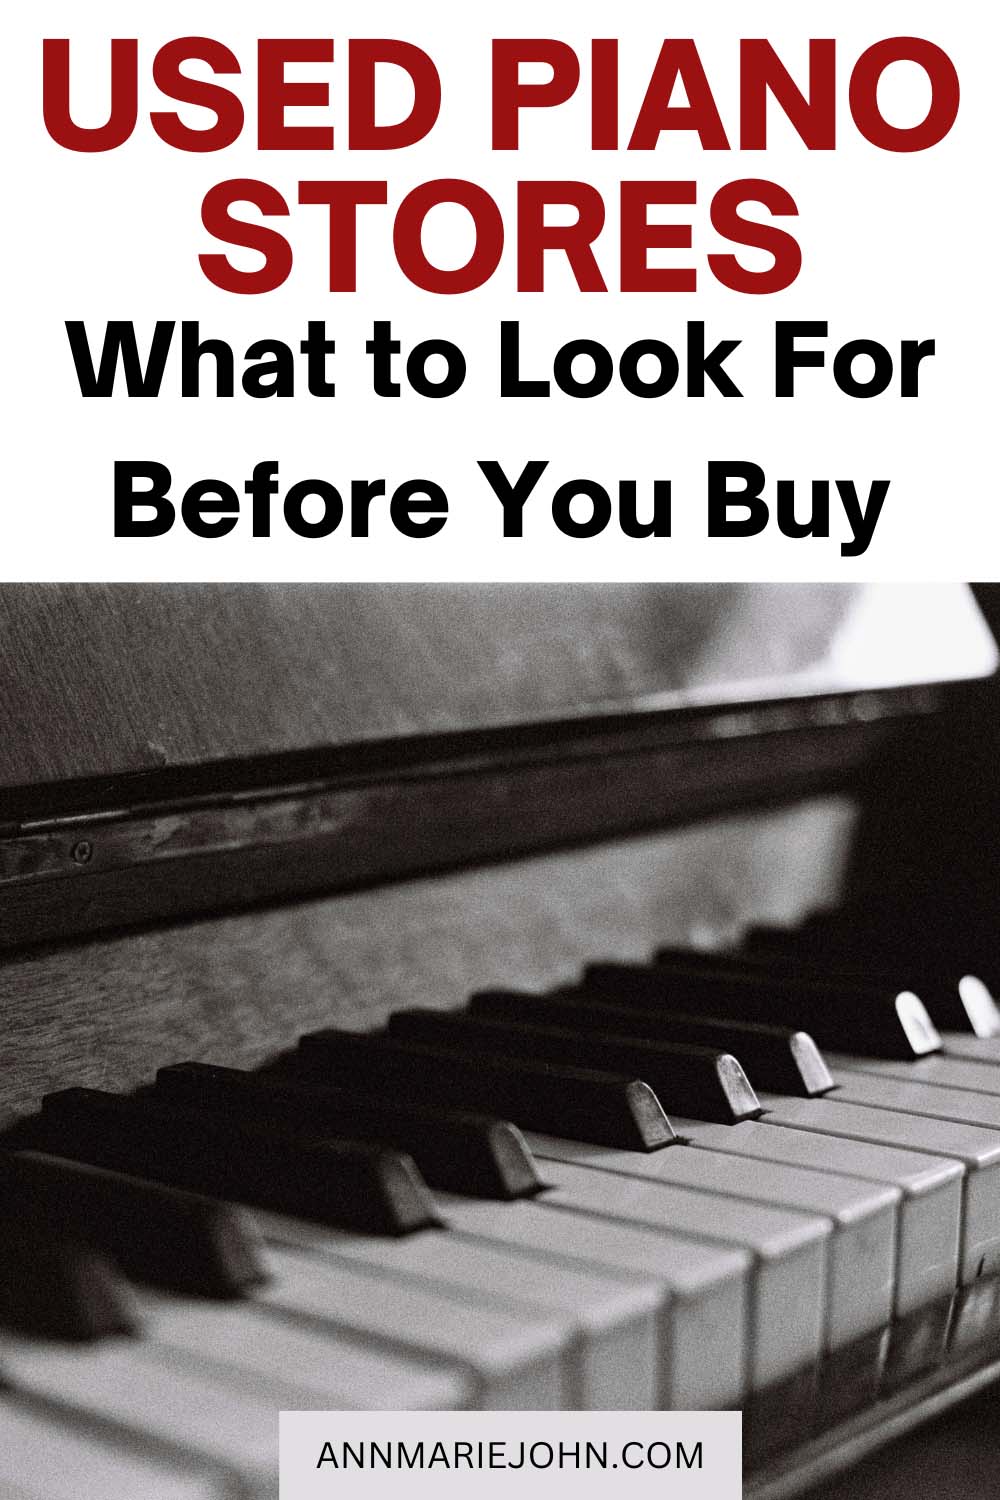 Used Piano Stores: What to Look For Before You Buy